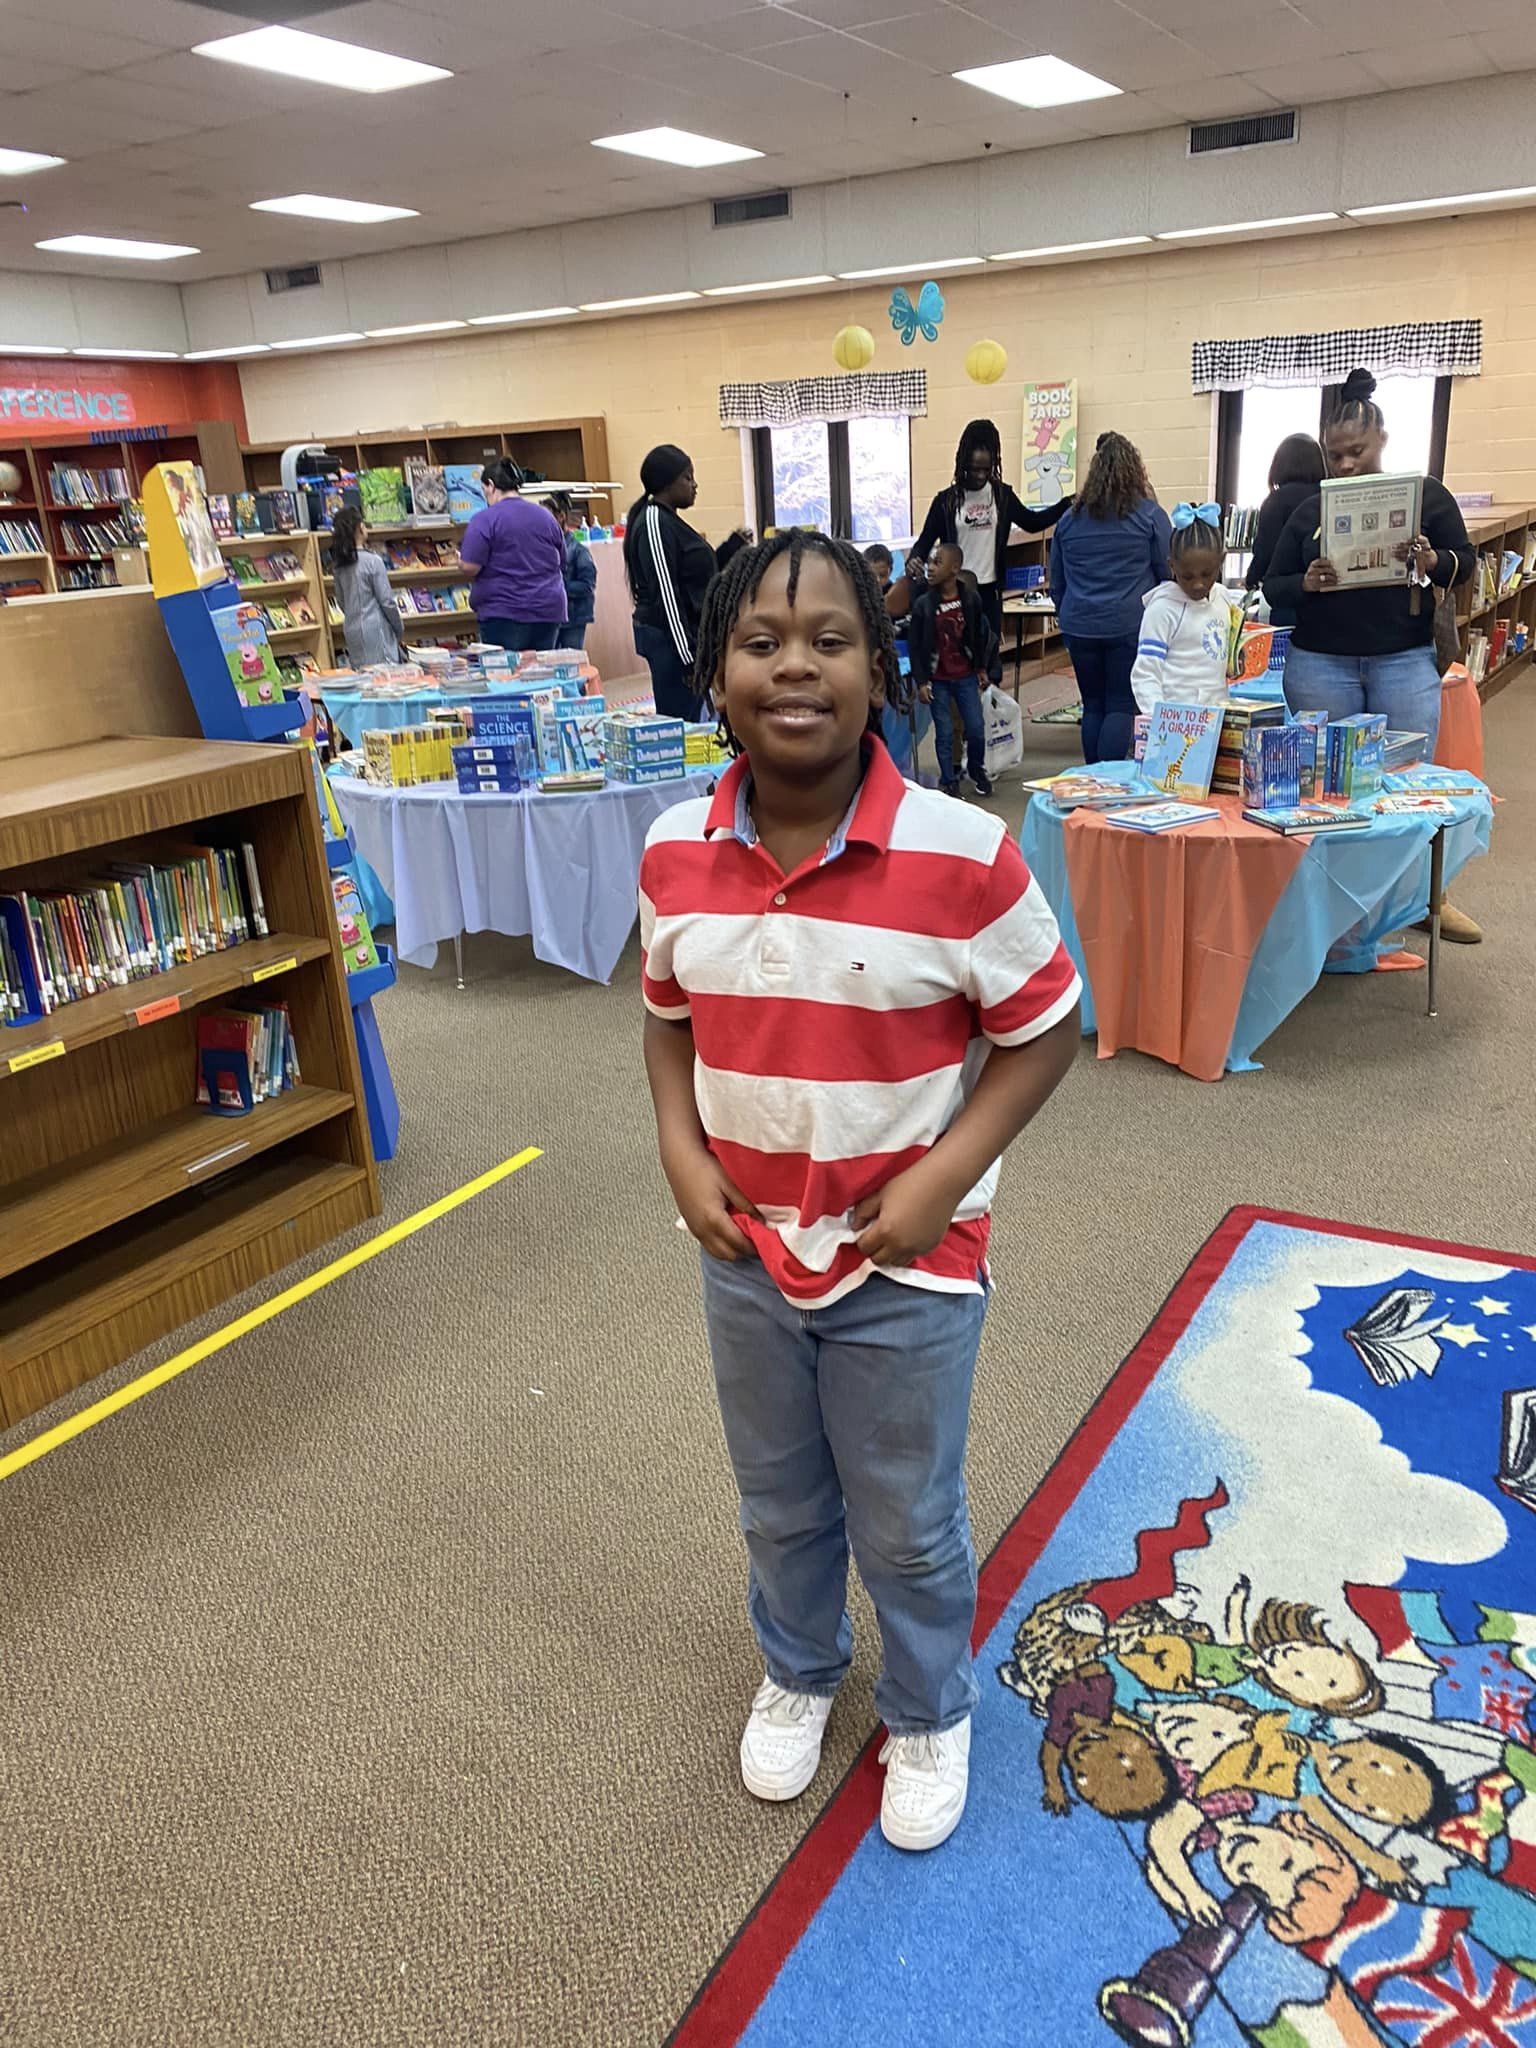 Student at the book fair in the library